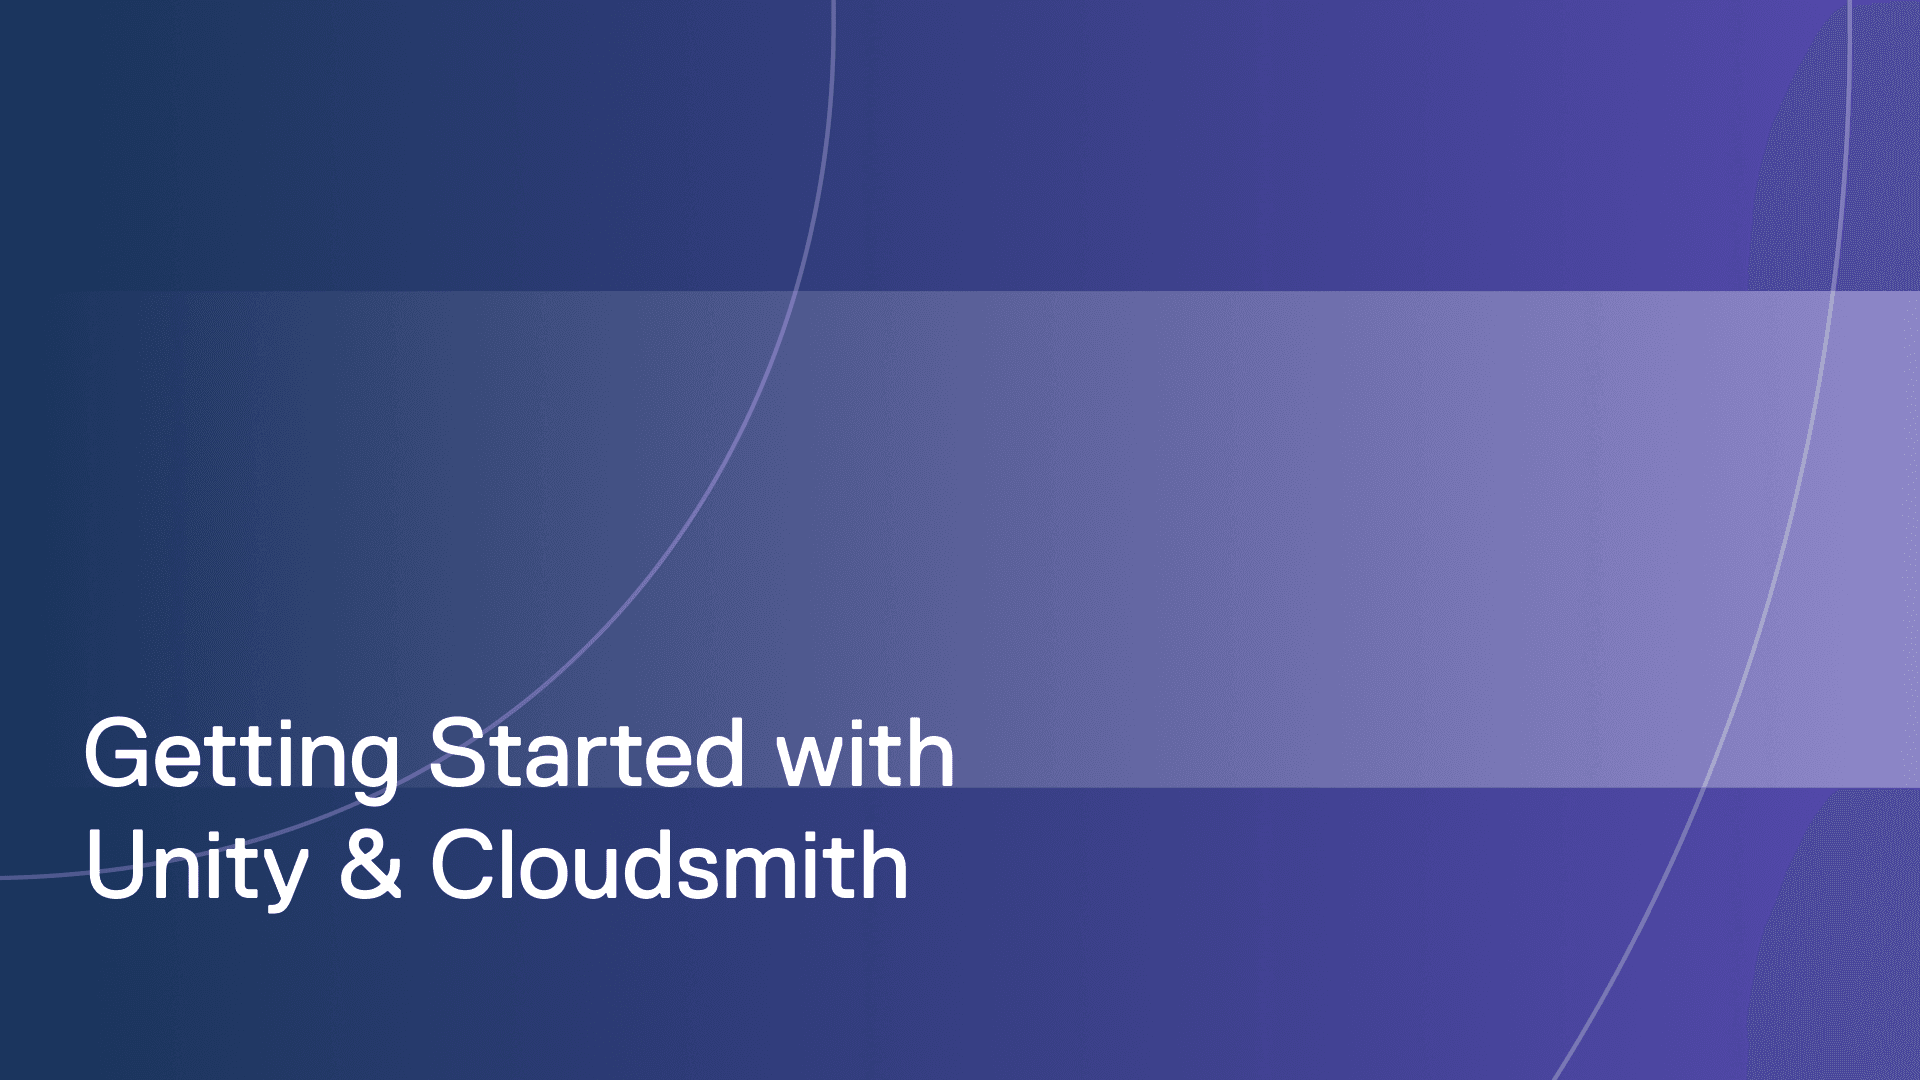 Getting started with Unity and Cloudsmith